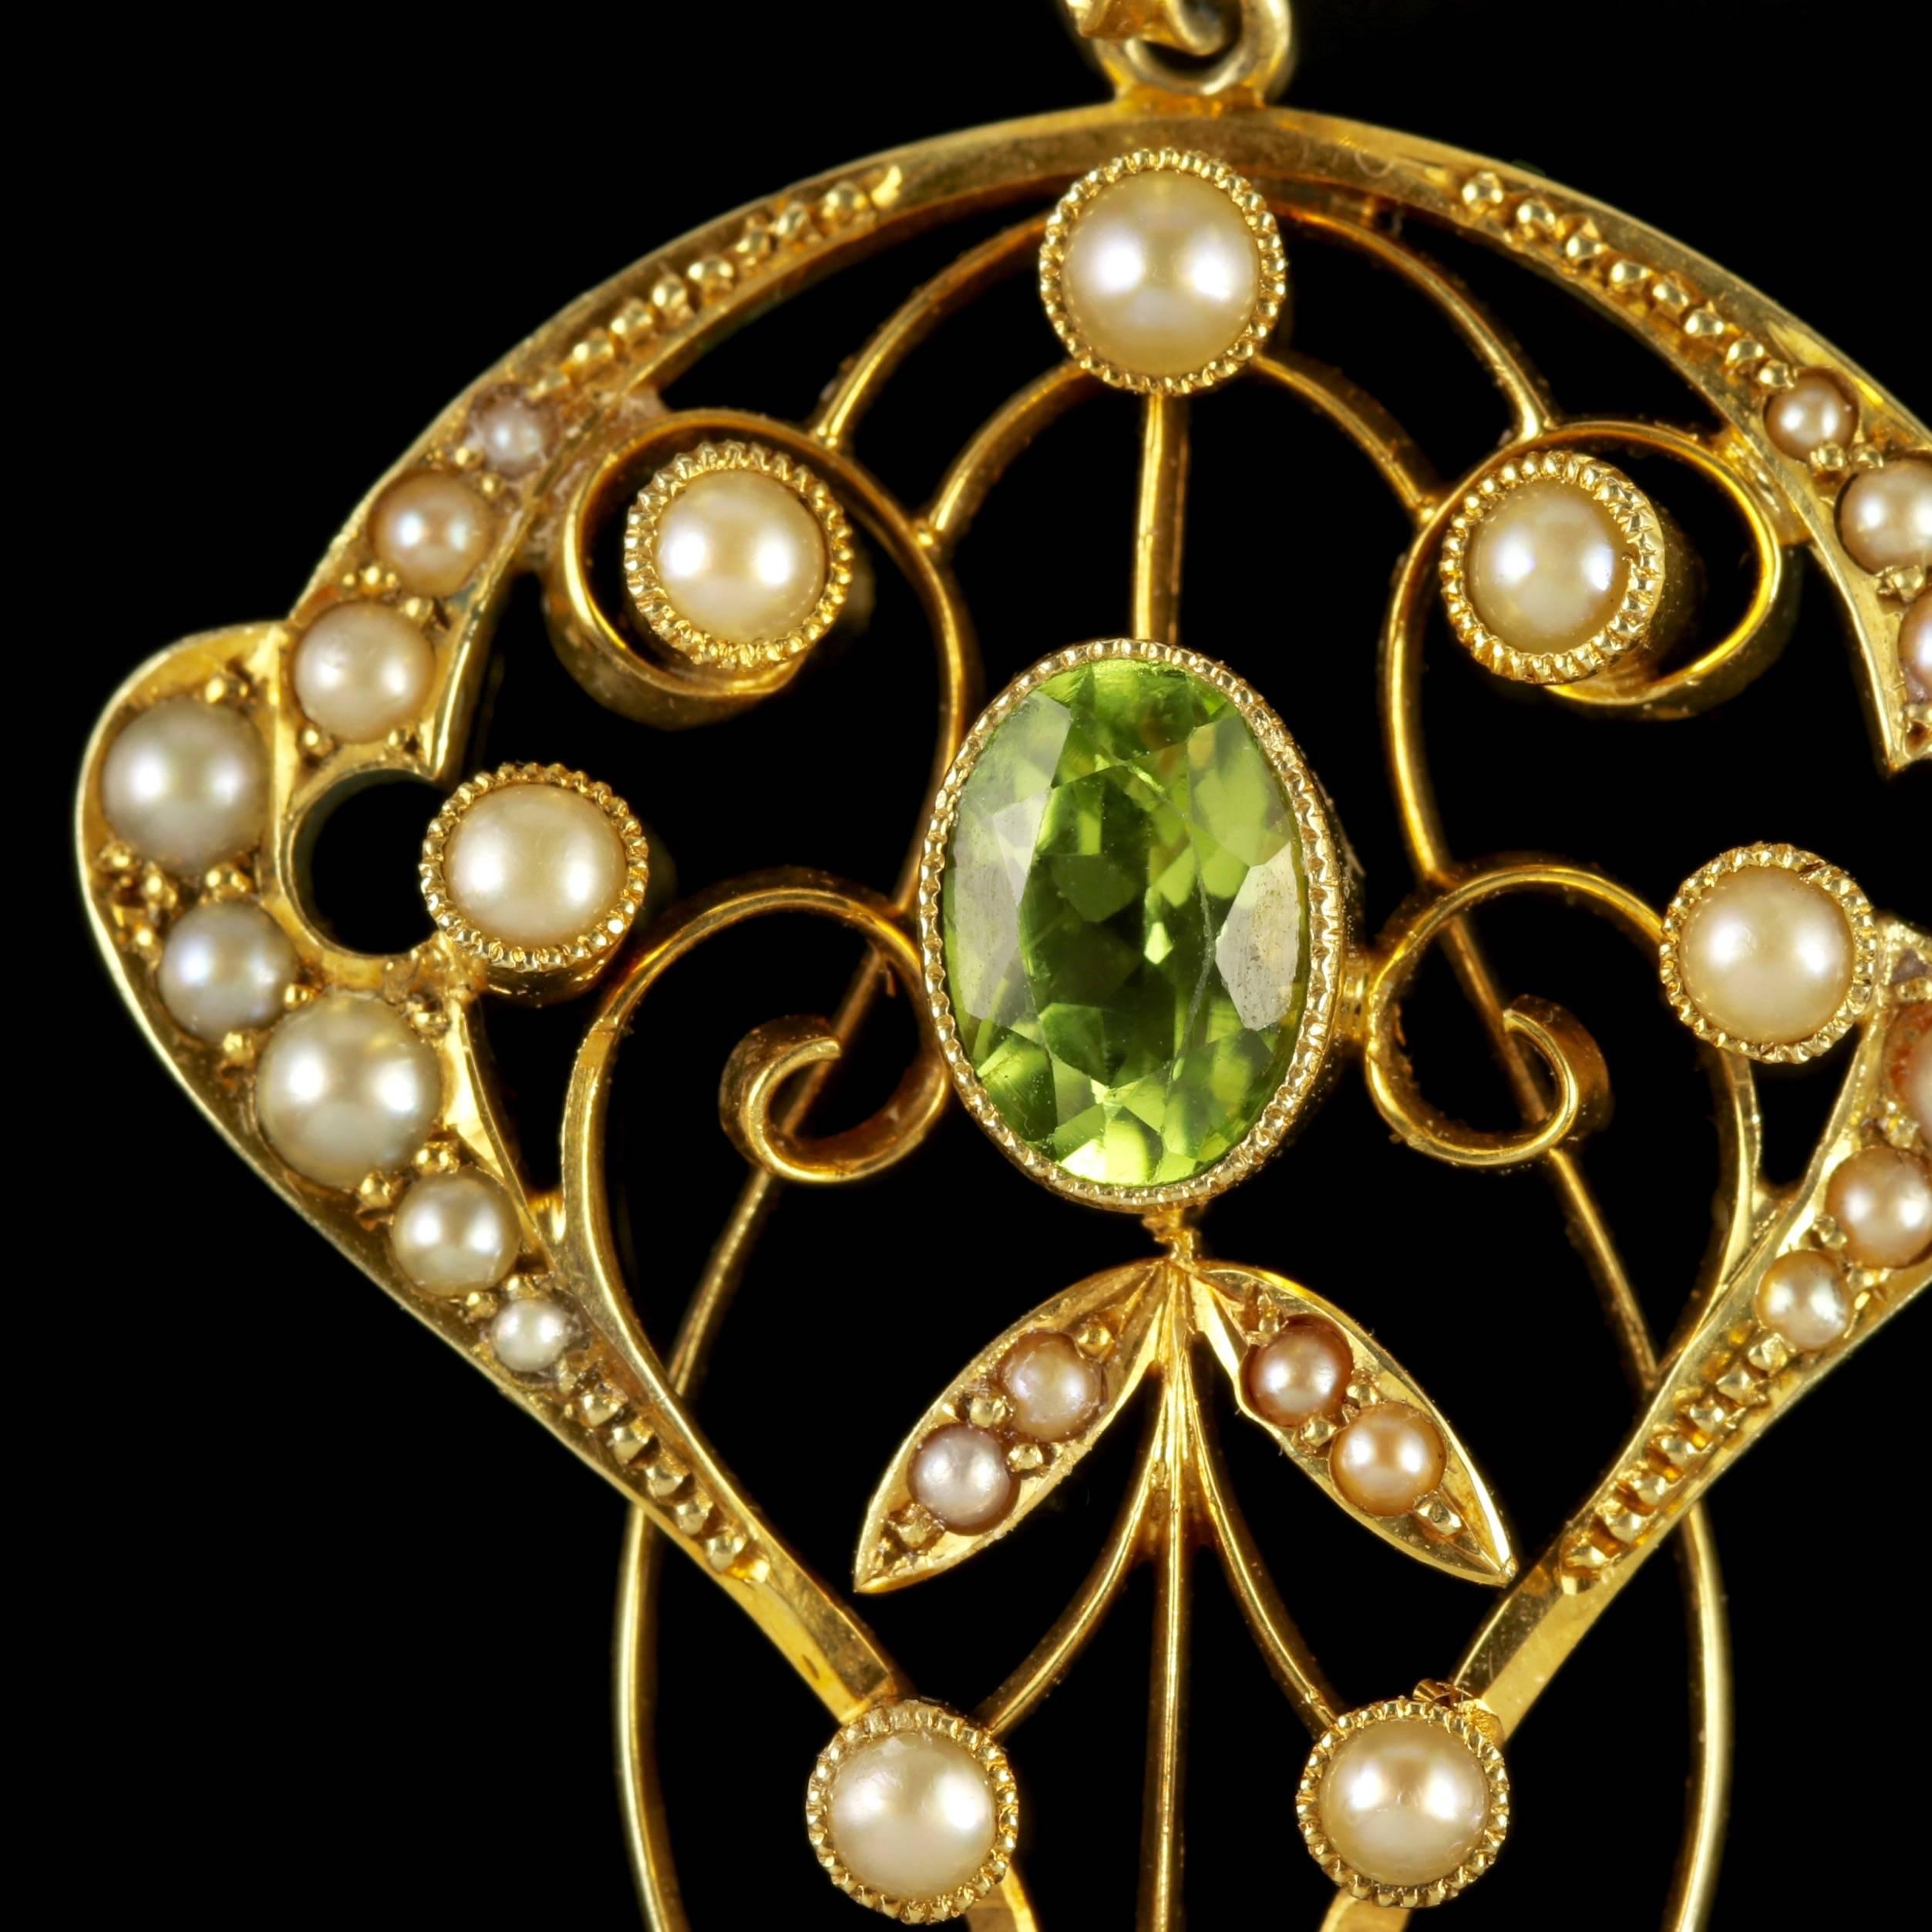 To read more please click continue reading below-

This fabulous antique Victorian 15ct Yellow Gold Suffragette pendant is Circa 1900.

Emmeline Pankhurst was the leader of the British Suffragette movement in the 19th century and through her efforts